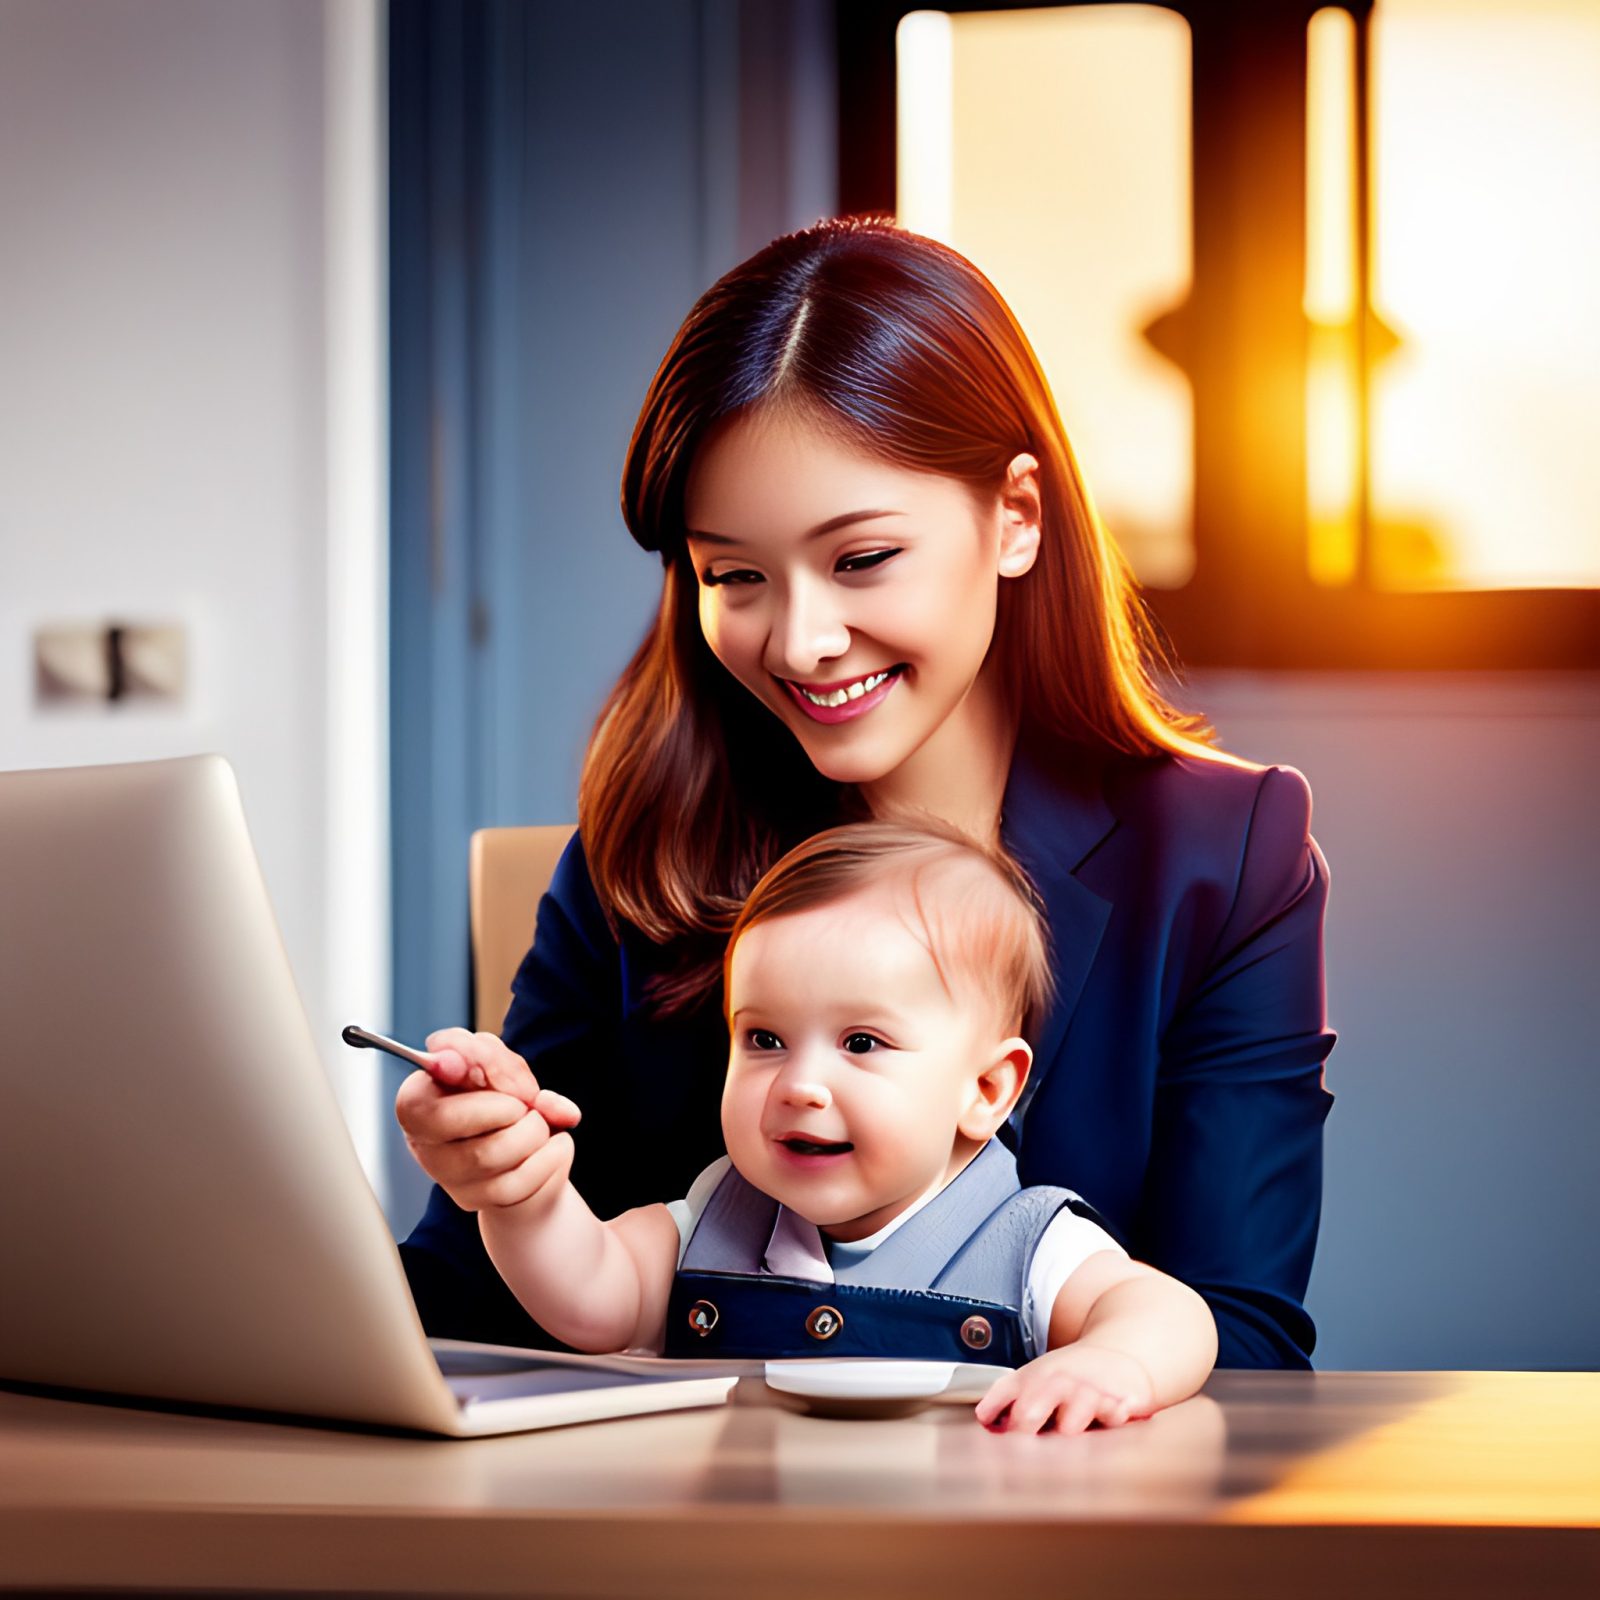 Parent multitasking between work and childcare at home